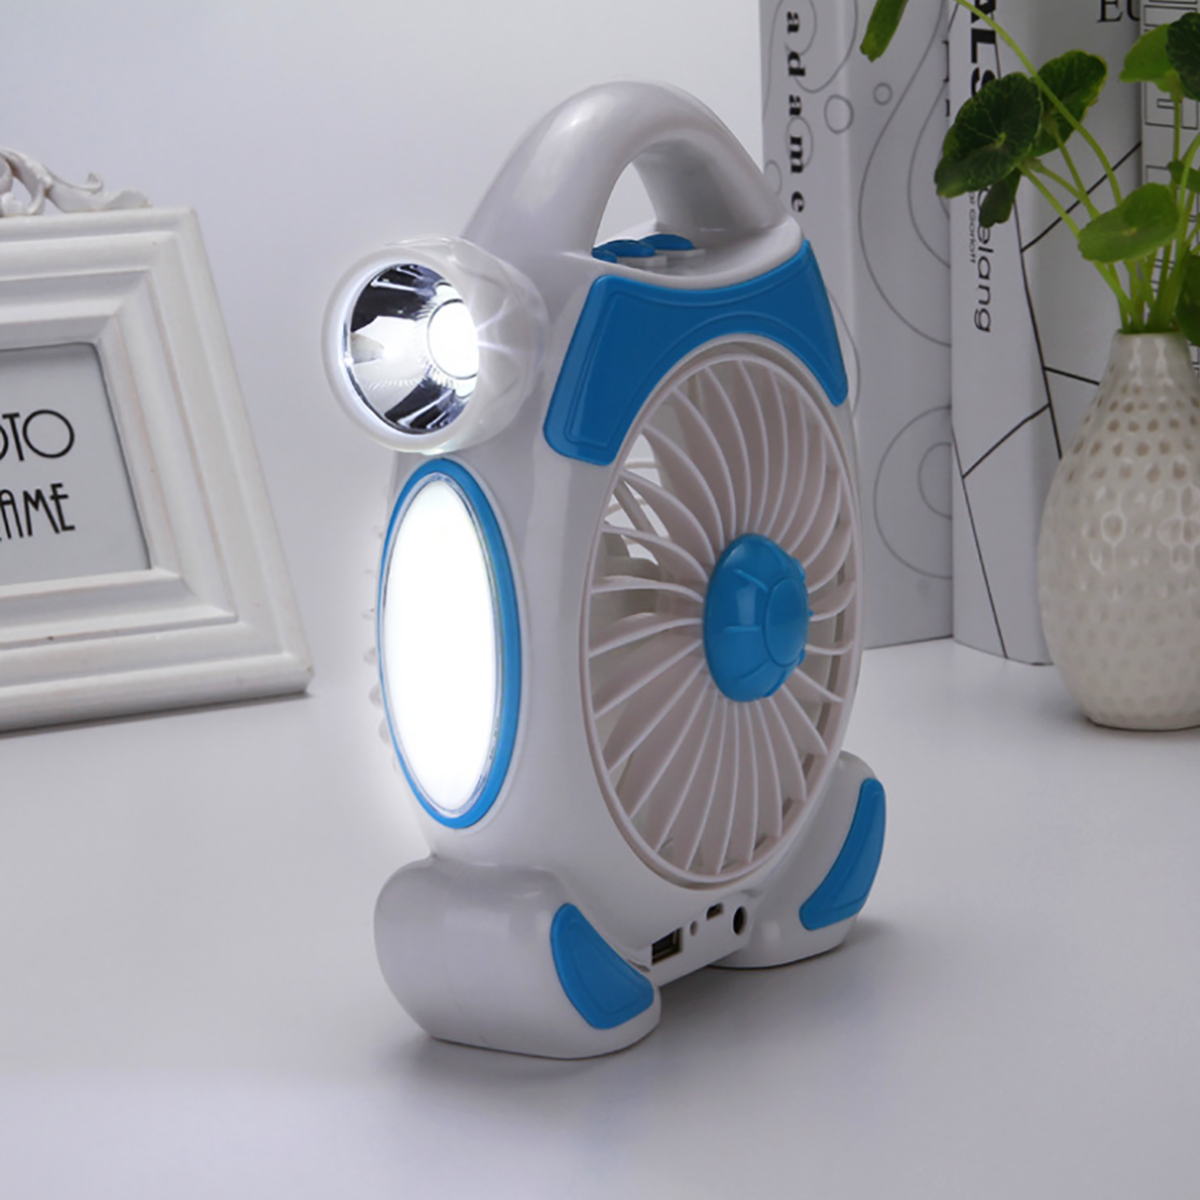 2-IN-1 Cordless Multi-functional USB Charging Fan with Emergency LED Light Outdoor Travel Camping Accessories